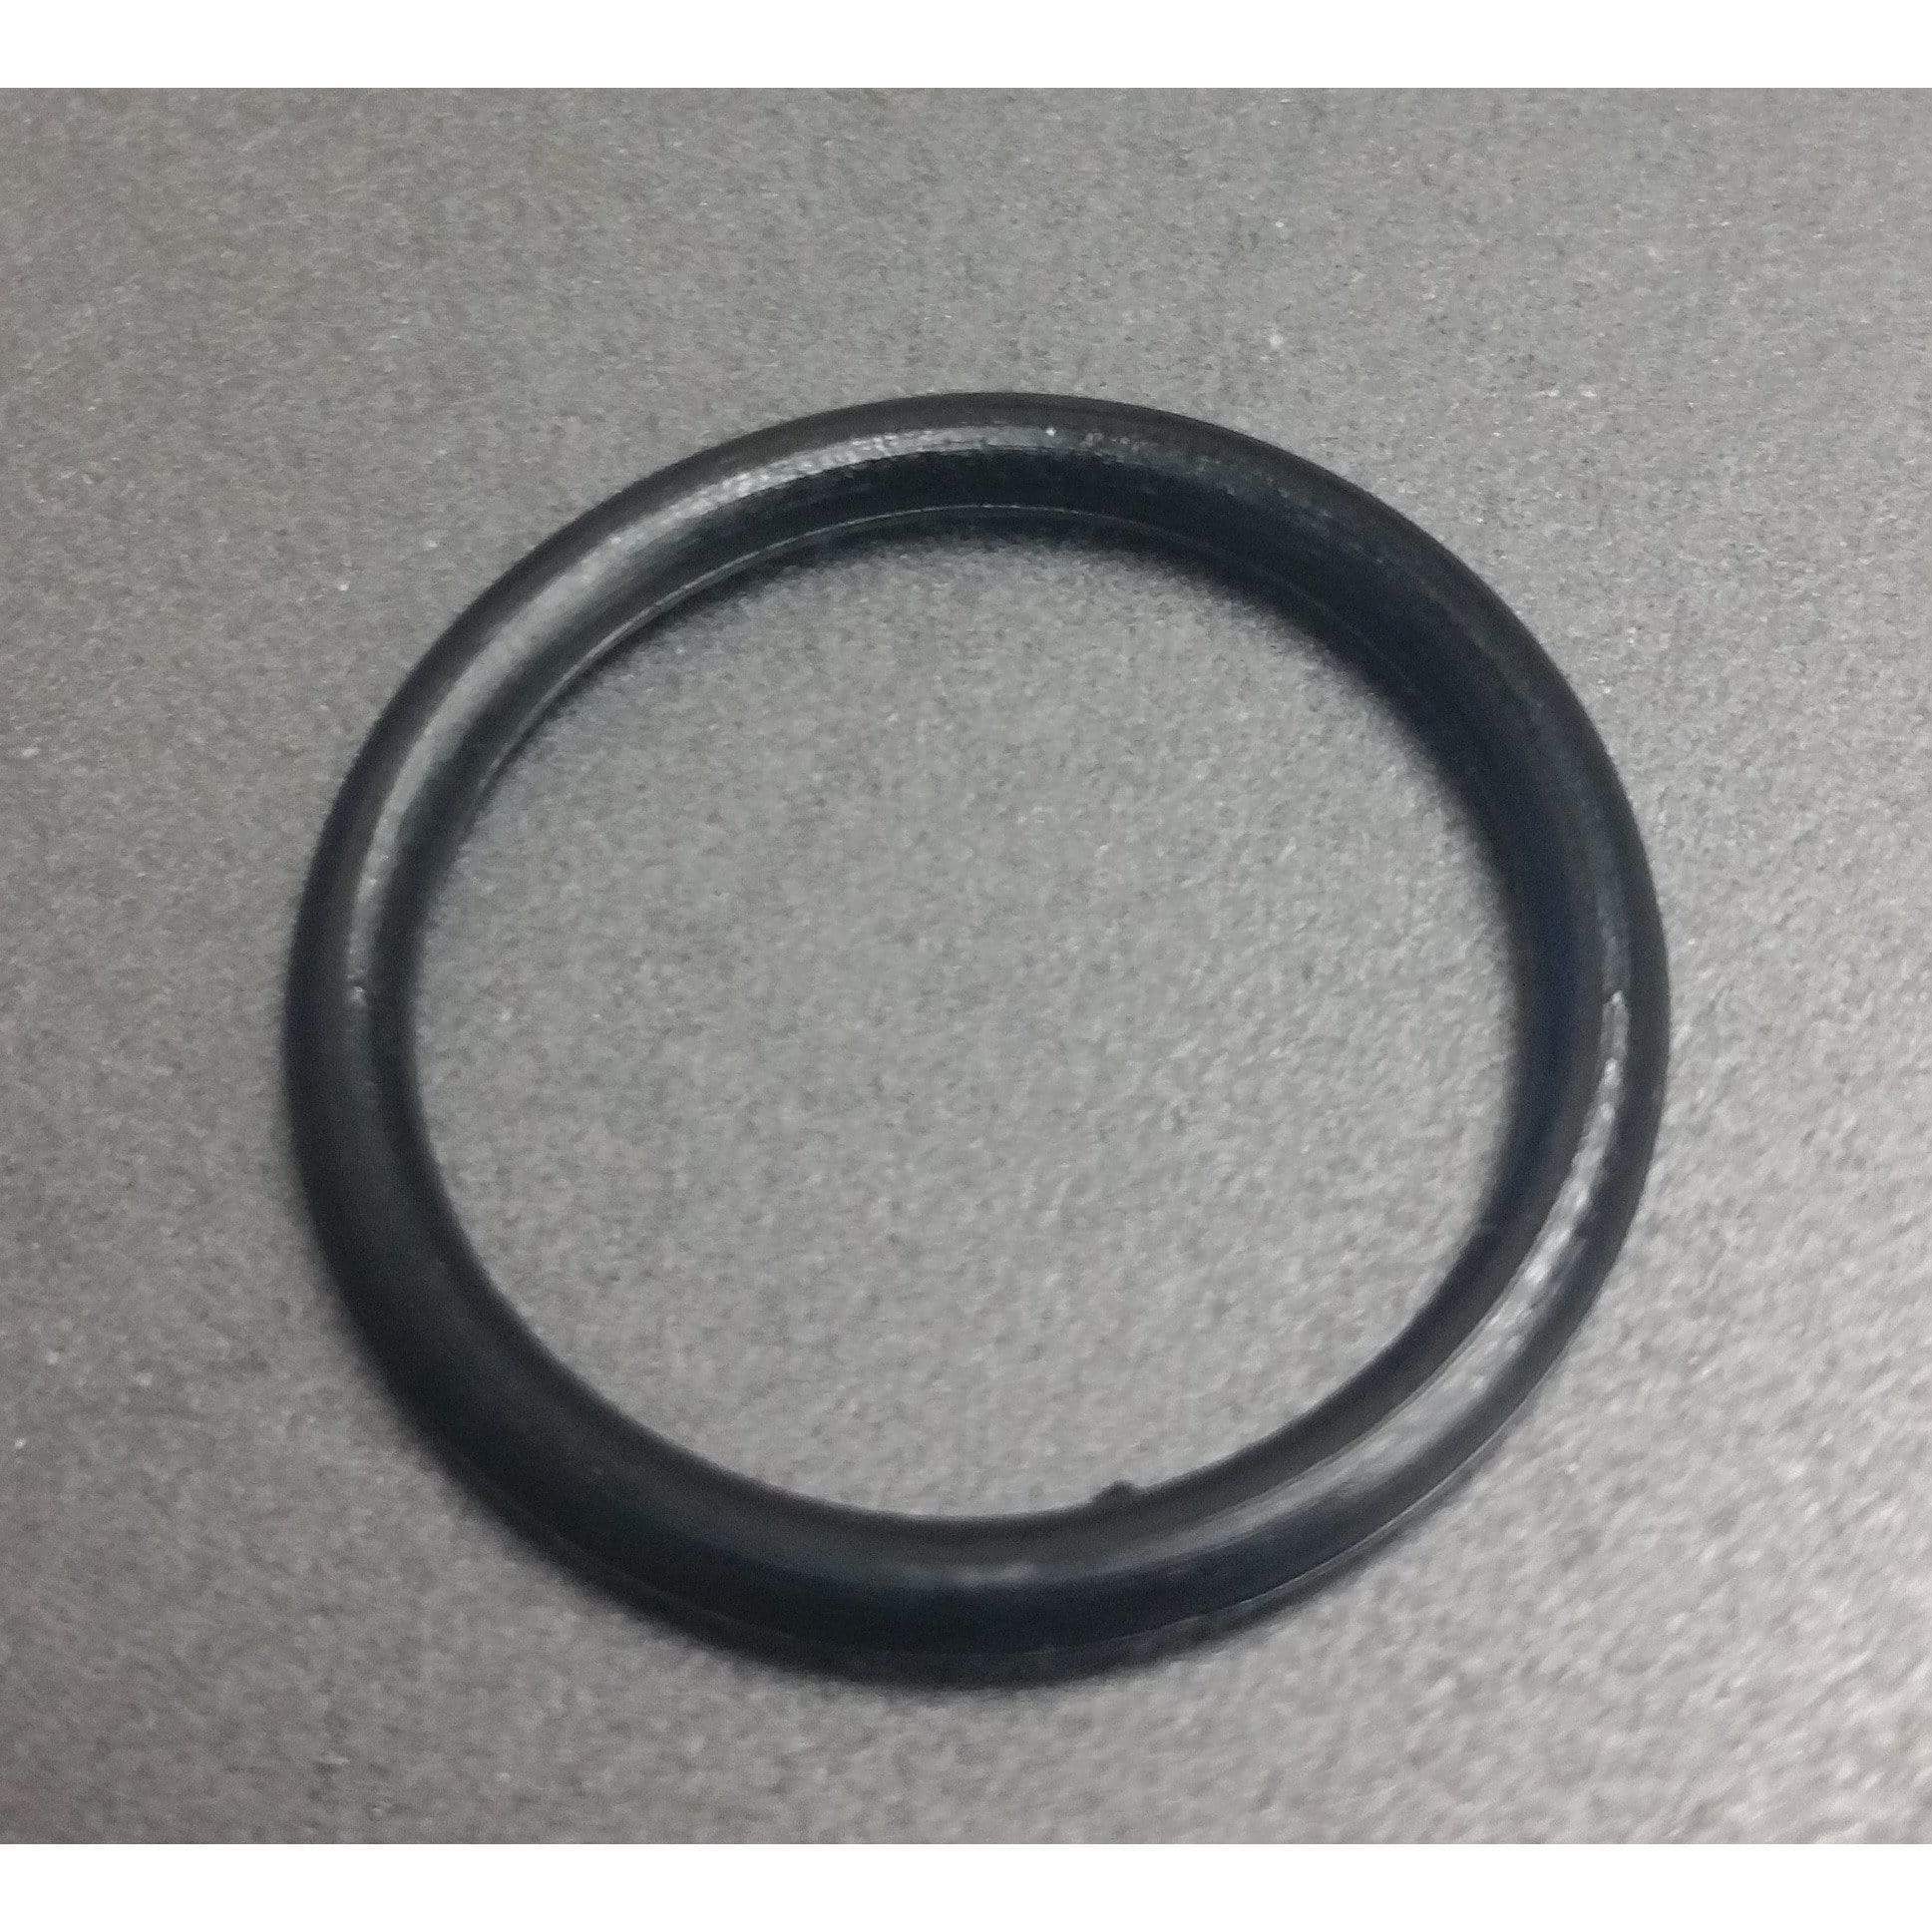 TFV12 Replacement Seals Top Glass Oring Black Seals/Oring's